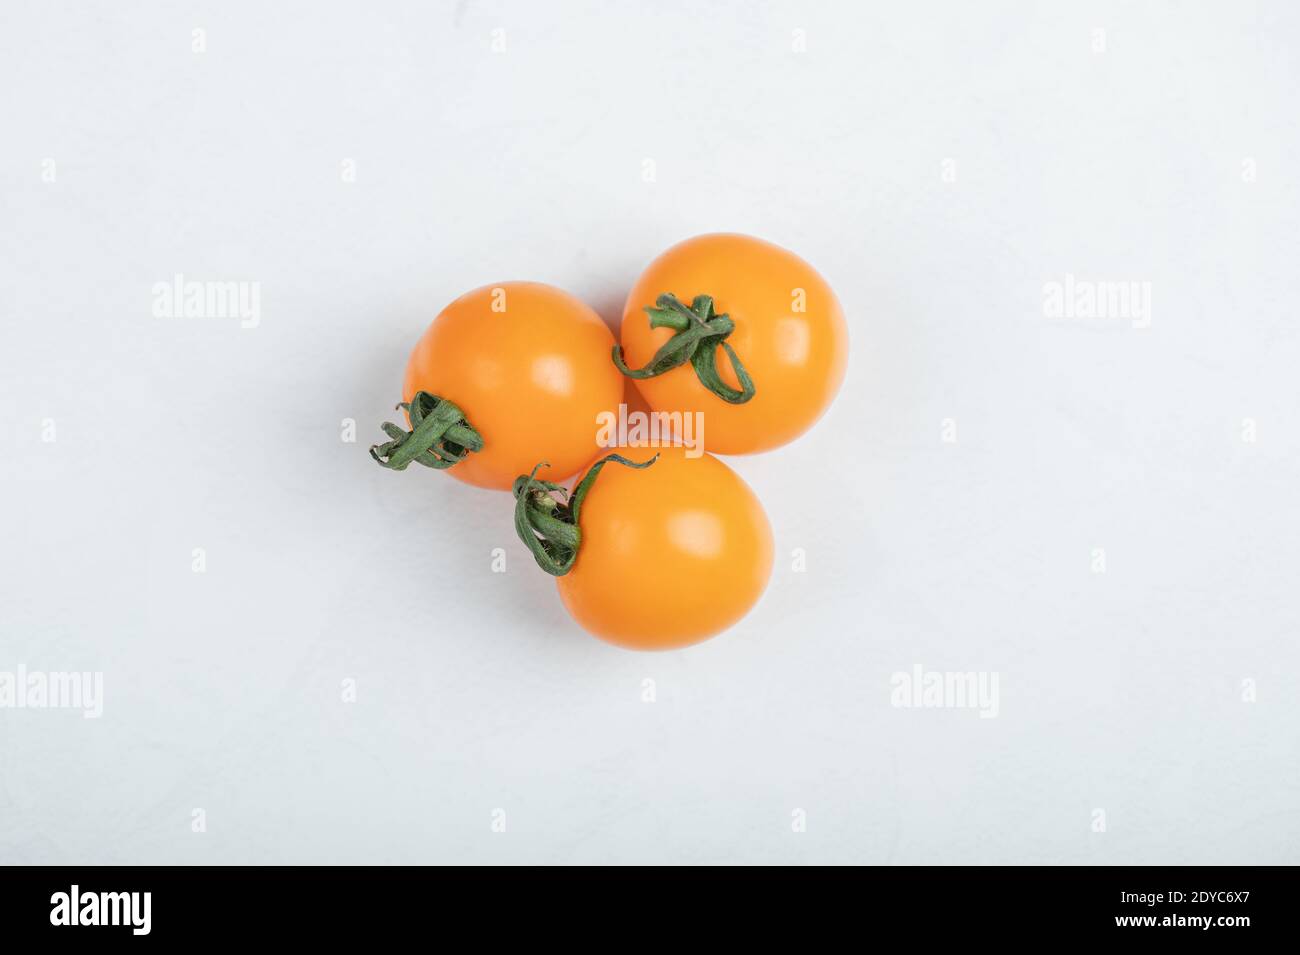 Cherry tomatoes isolated on white background. Yellow pear, isis candy cherry tomato Stock Photo